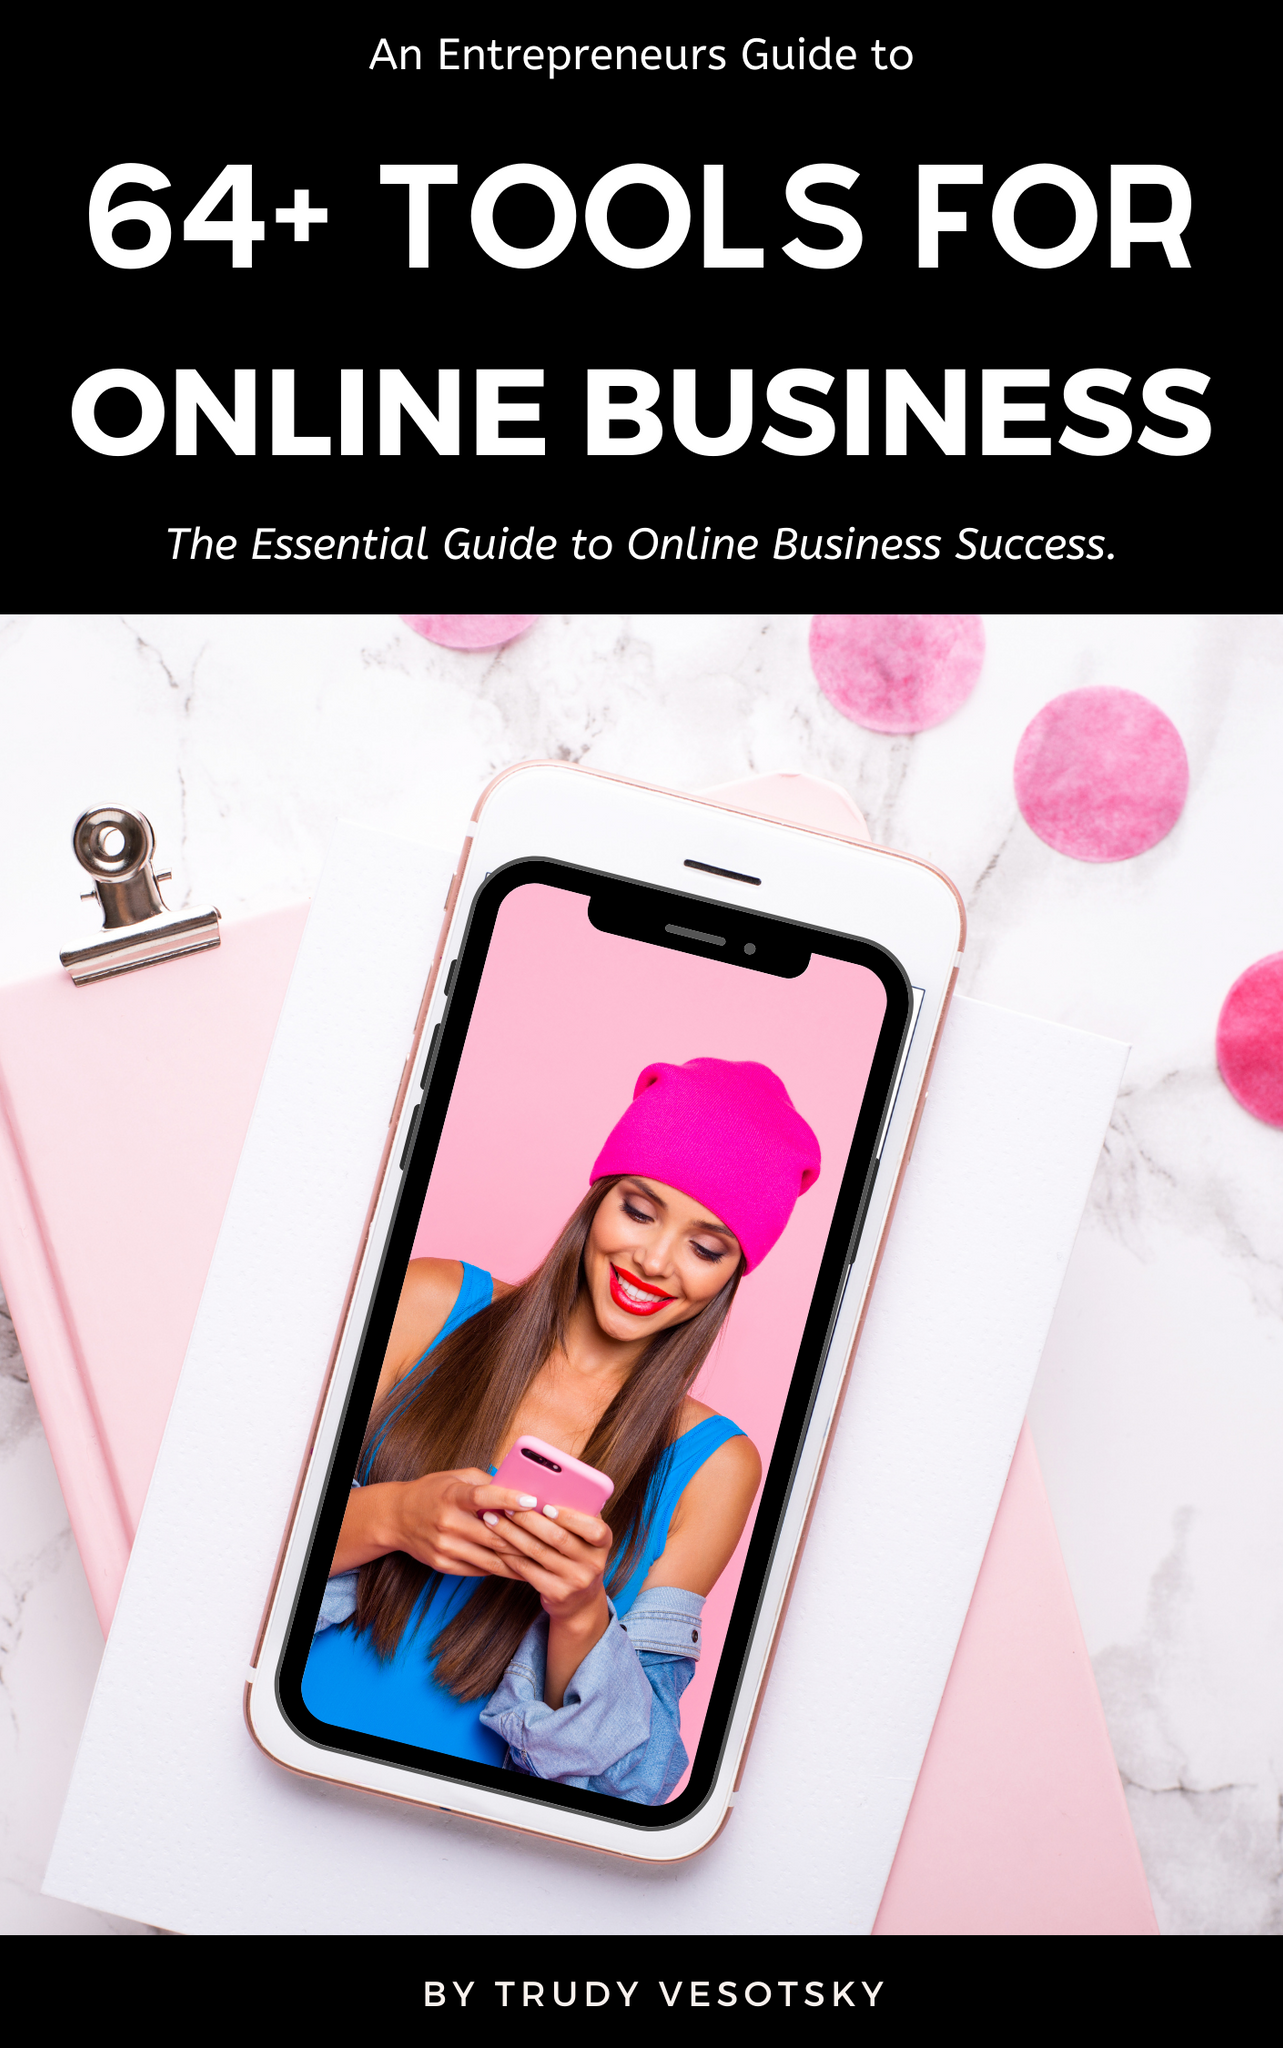 64+ Tools for Online Business Success Ebook with clickable links